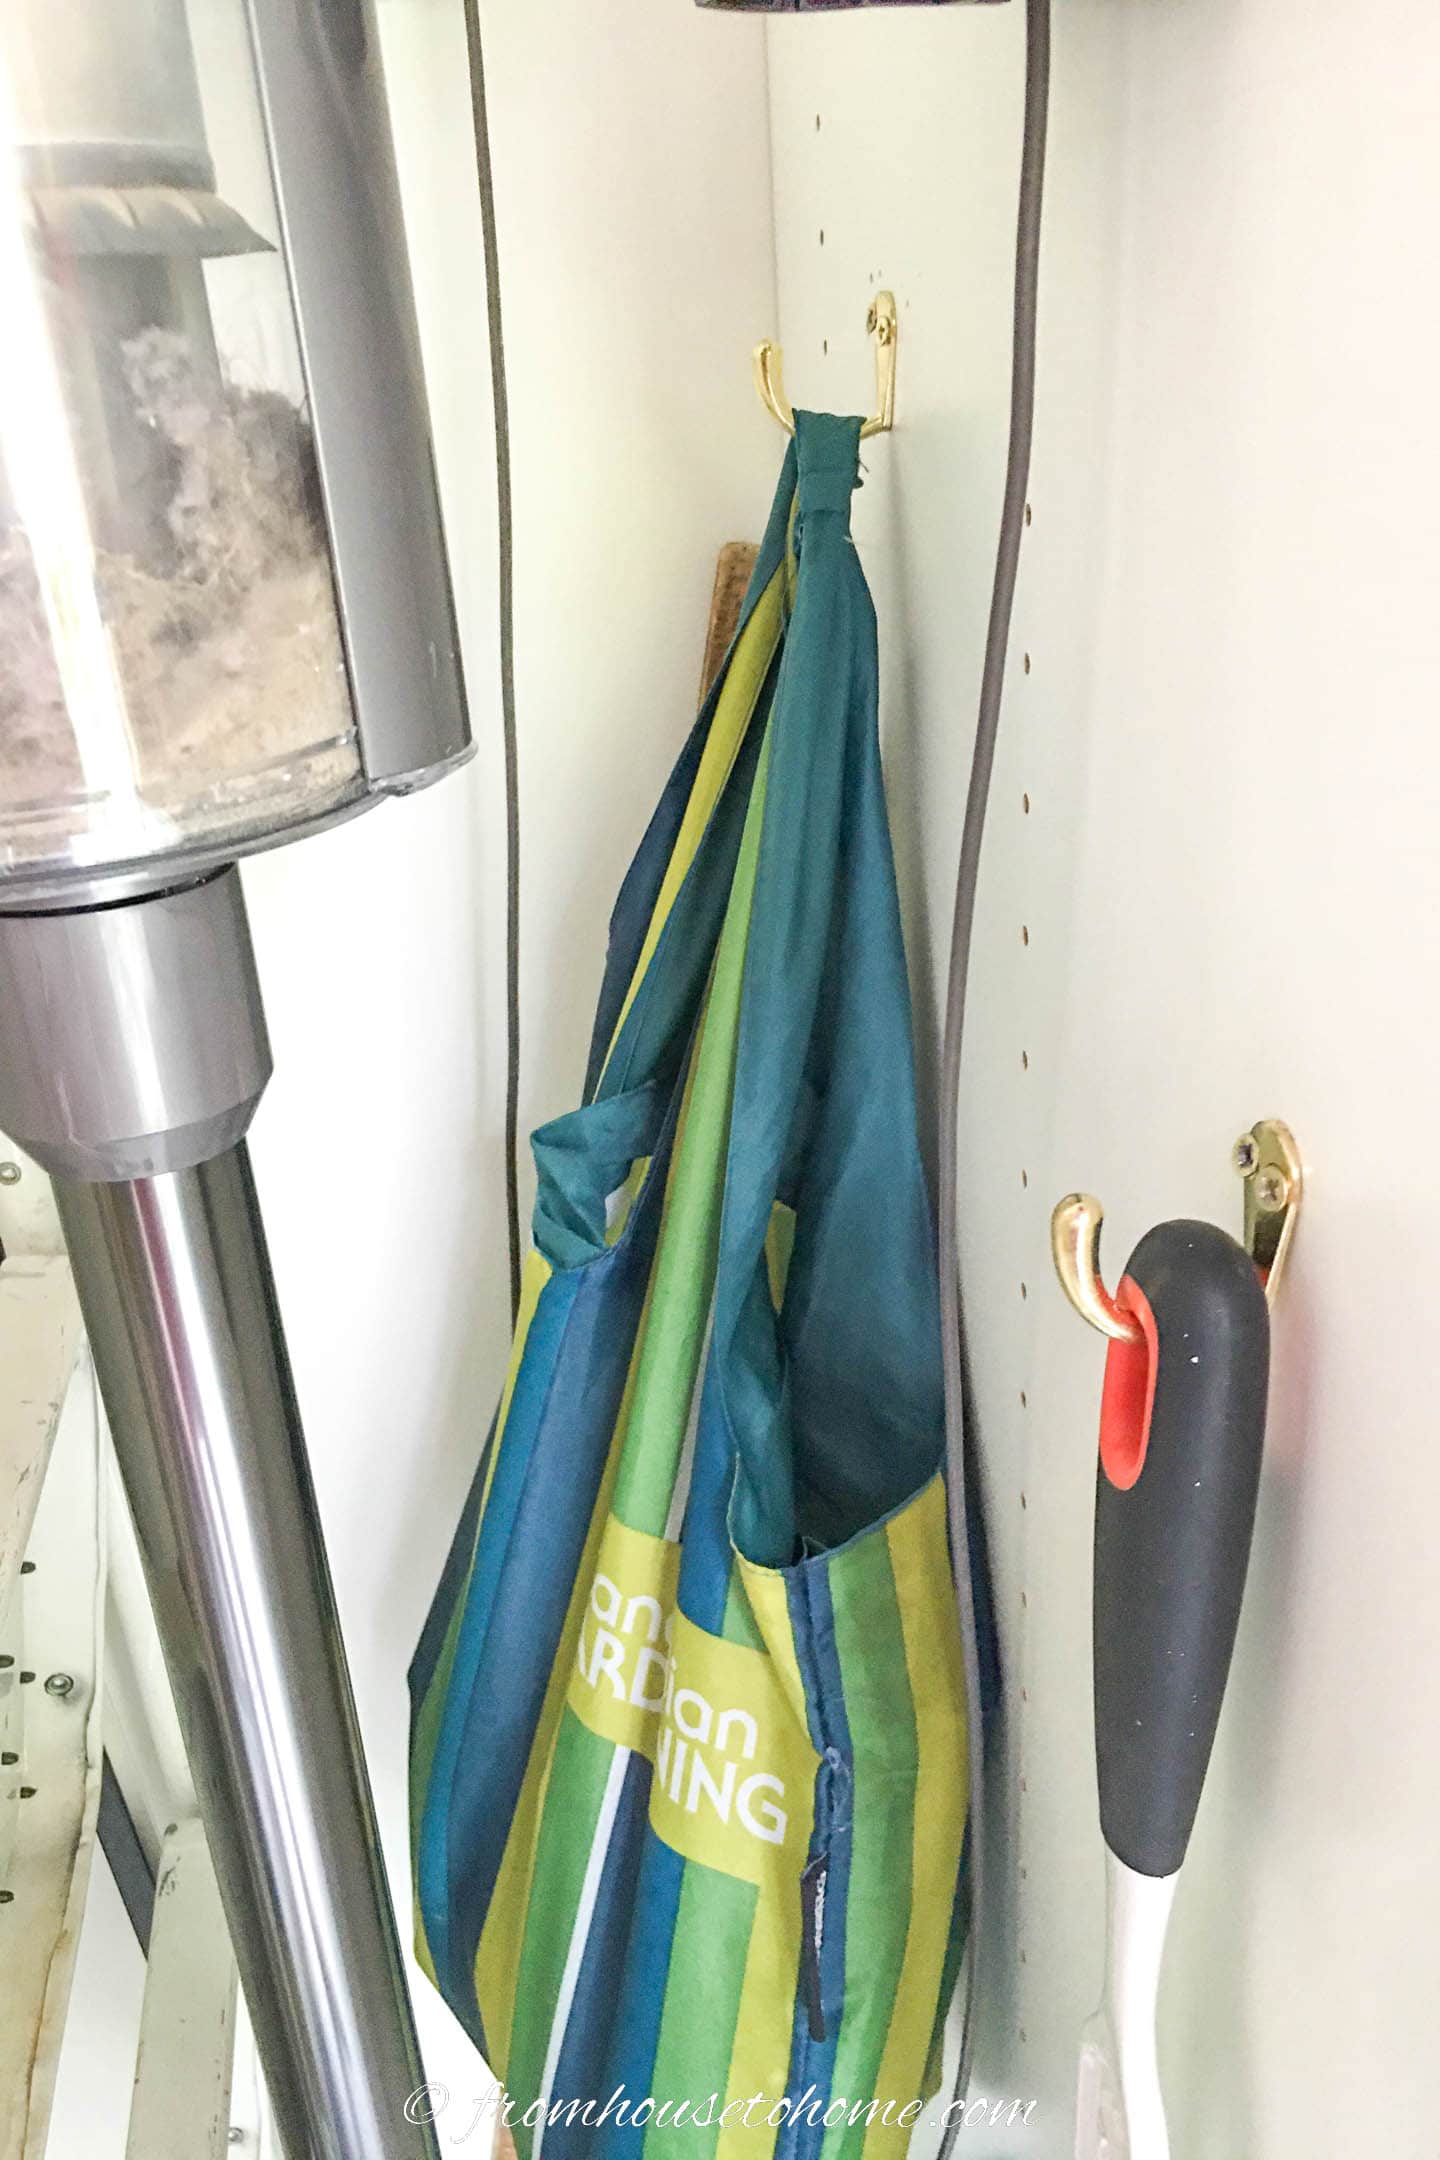 A bag storing vacuum accessories hung in a kitchen pantry